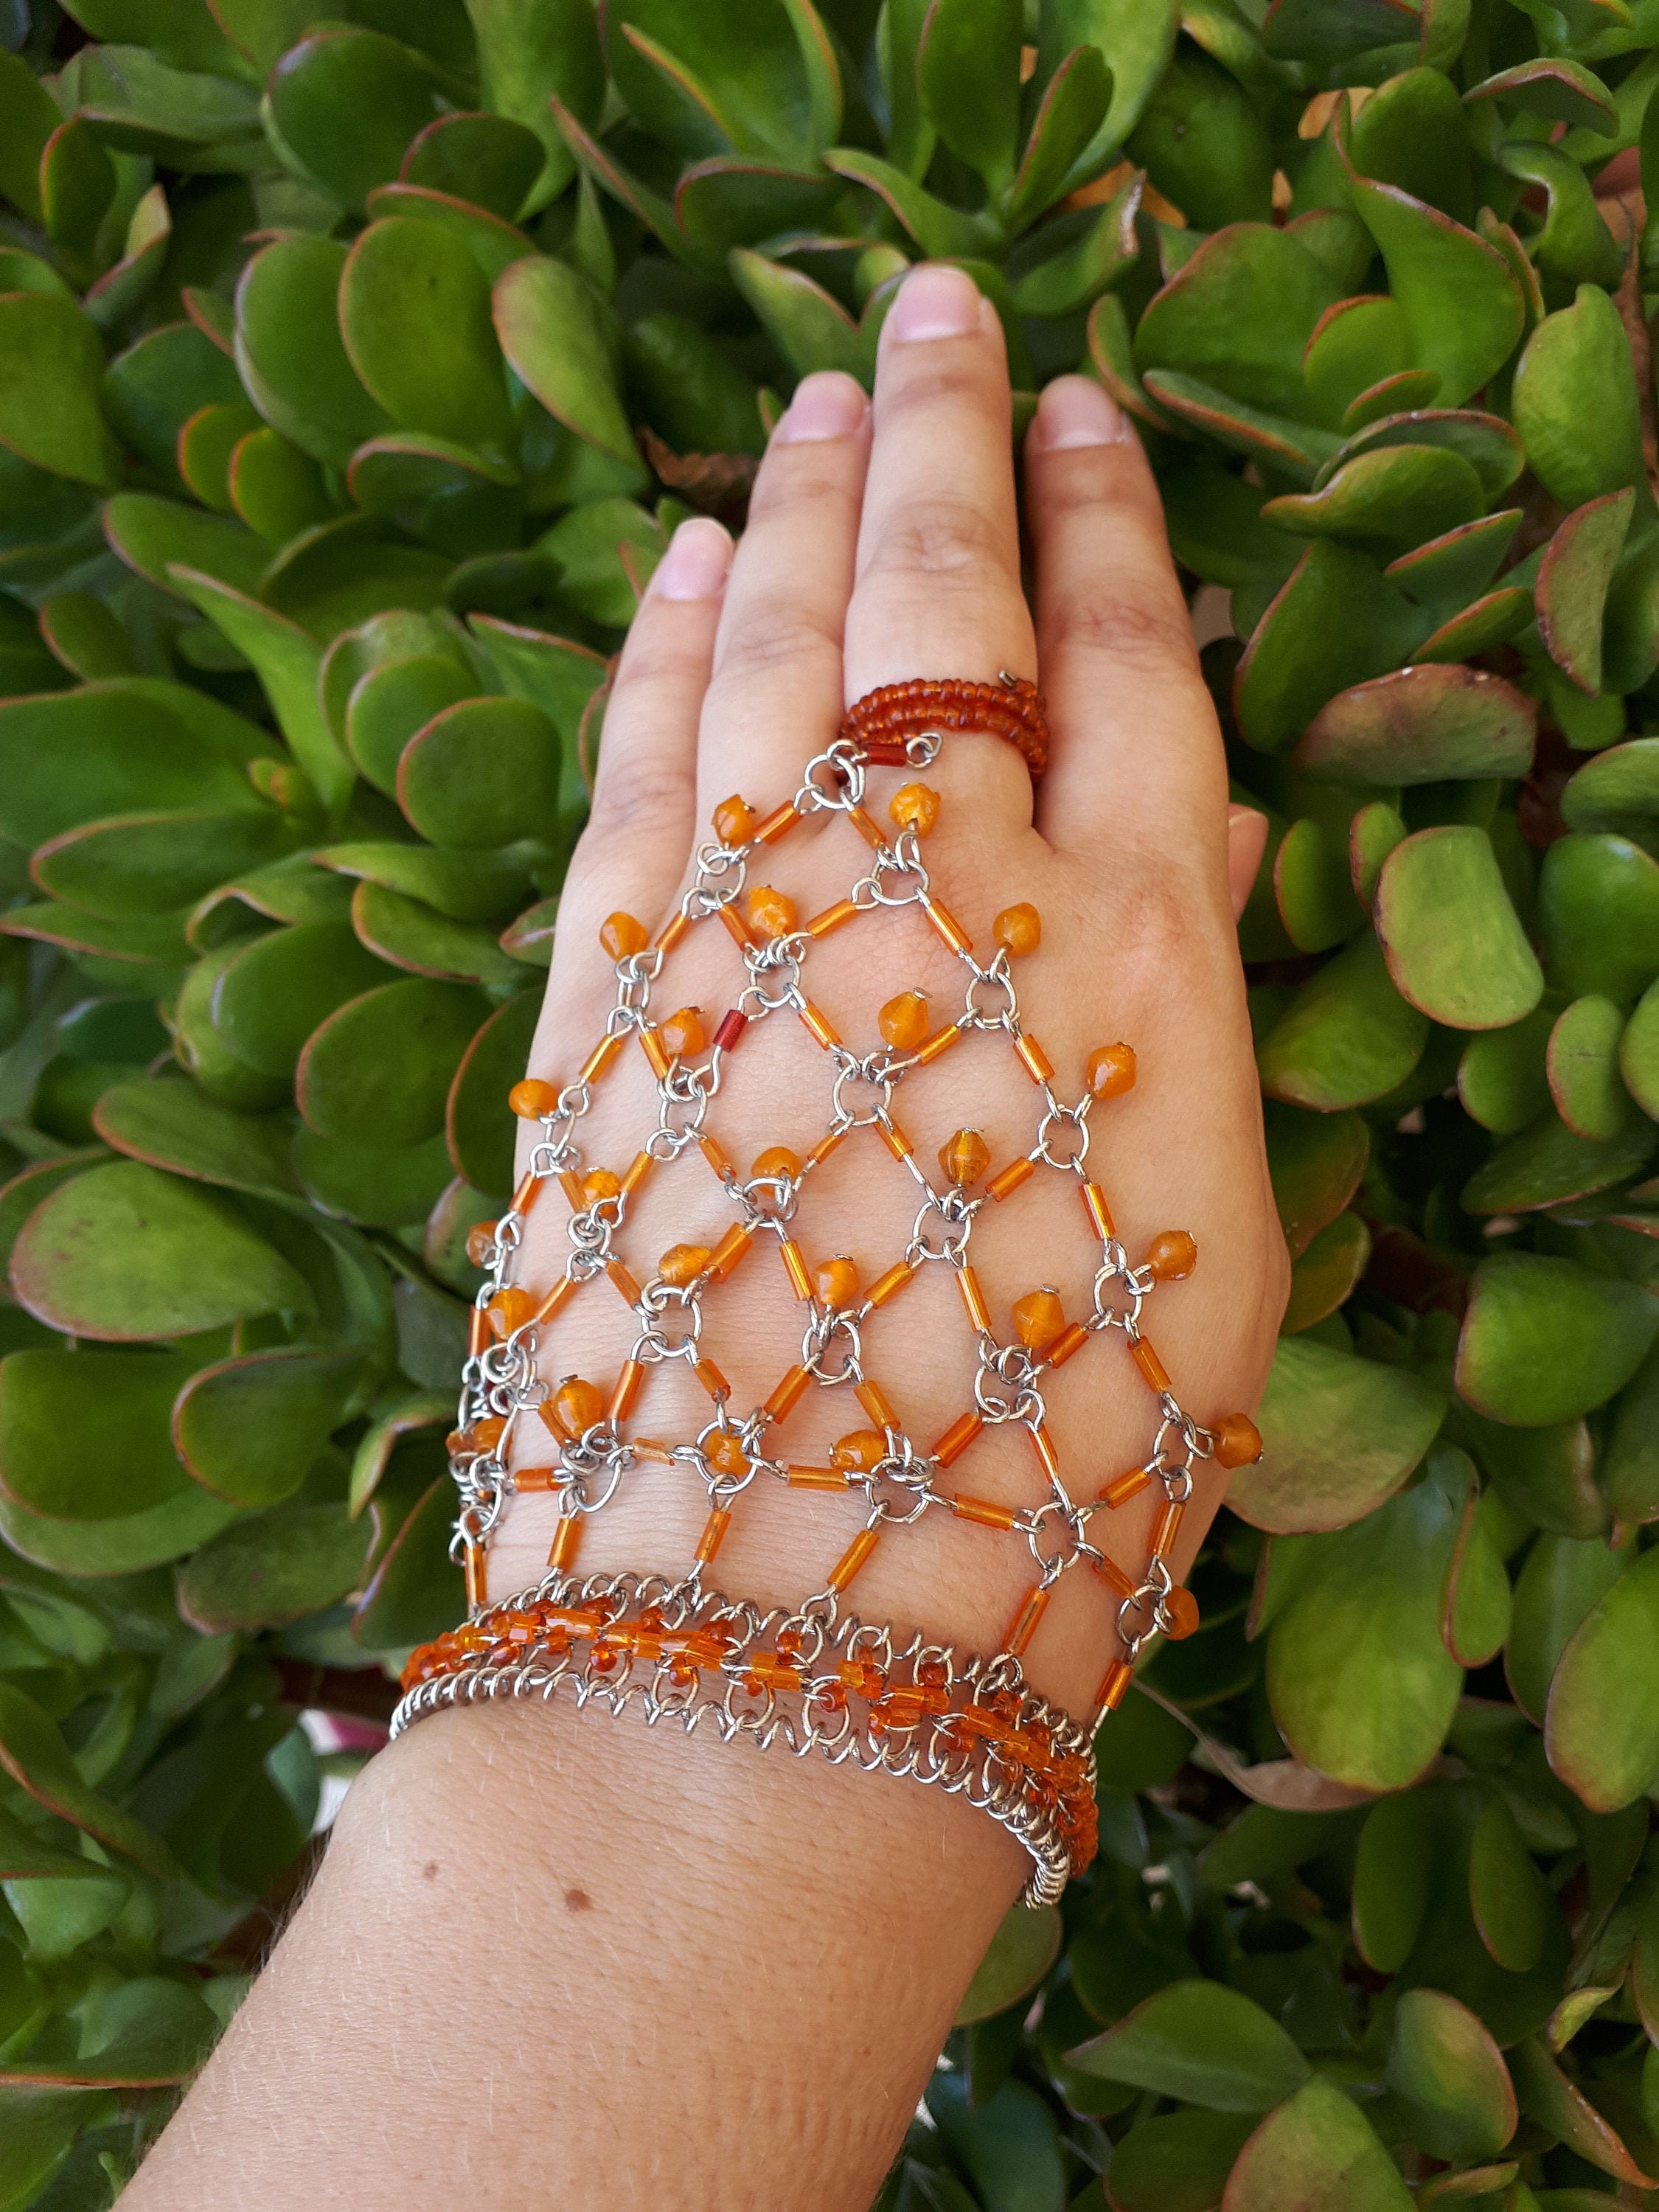 Rose Gold Slave Bracelet Ring, Delicate Hand Chains, Handchains – AMYO  Jewelry